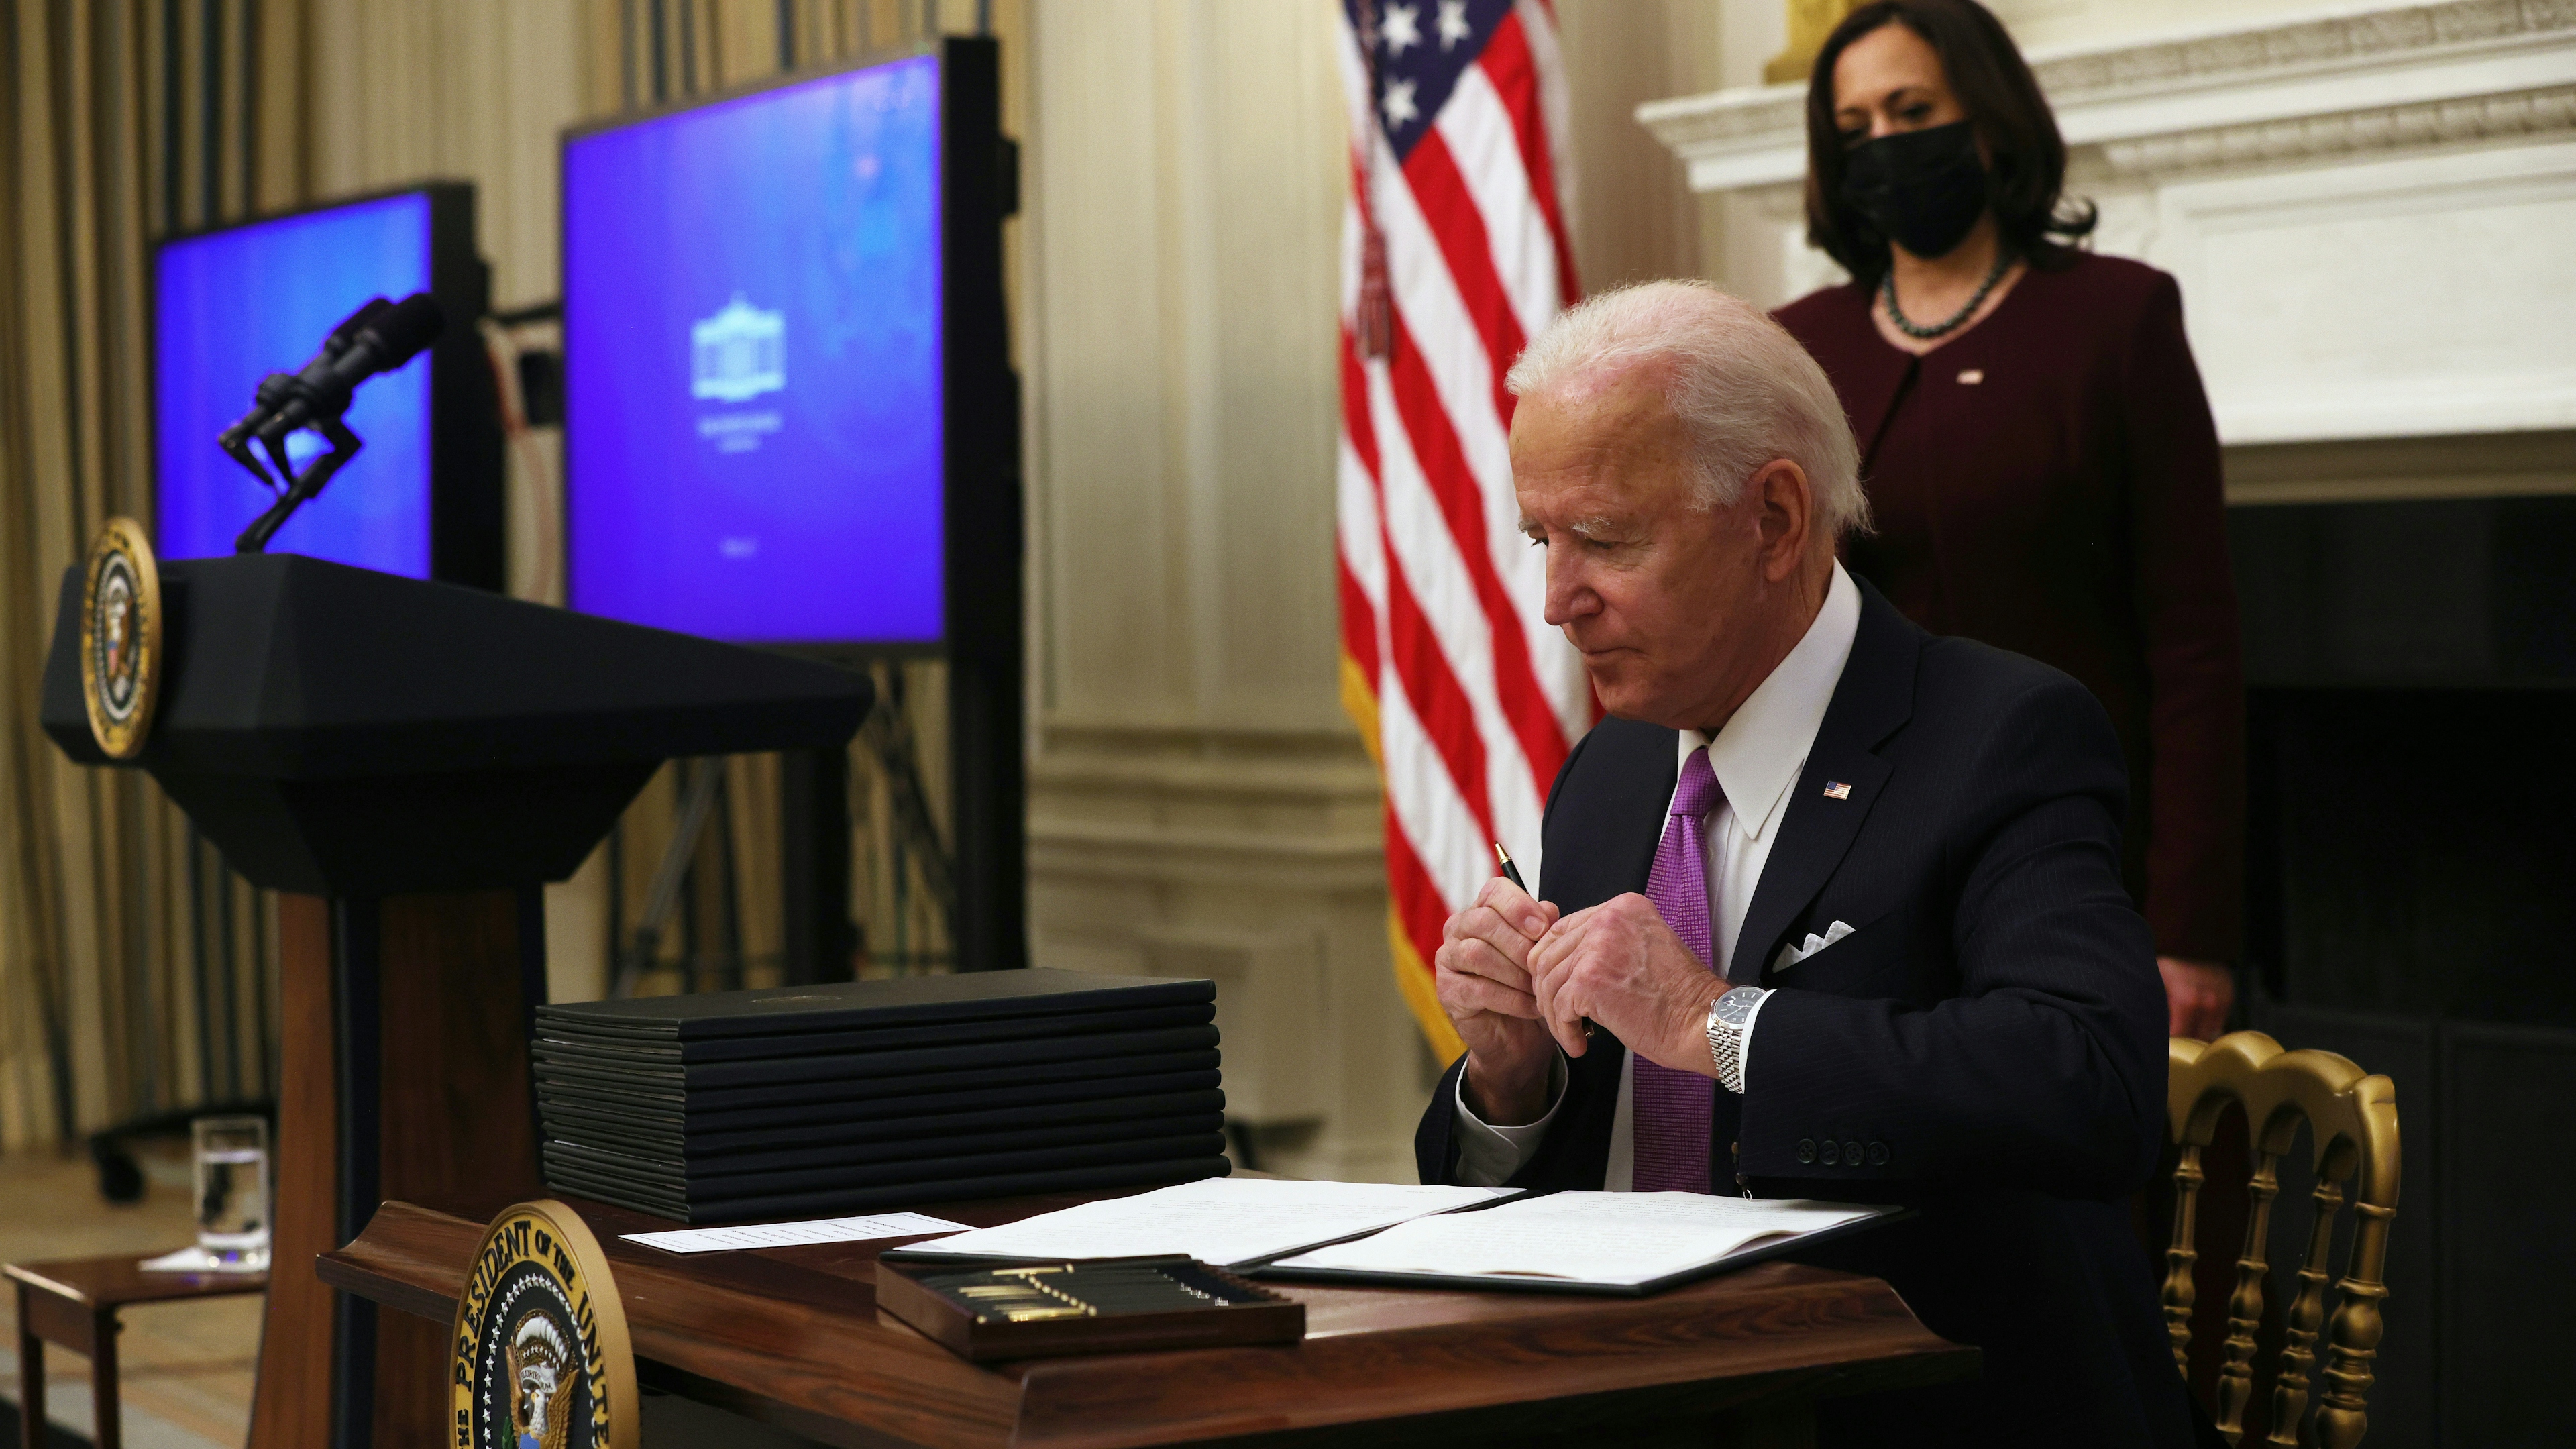 U.S. President Joe Biden signs executive orders as Vice President Kamala Harris looks on during an event at the State Dining Room of the White House January 21, 2021.